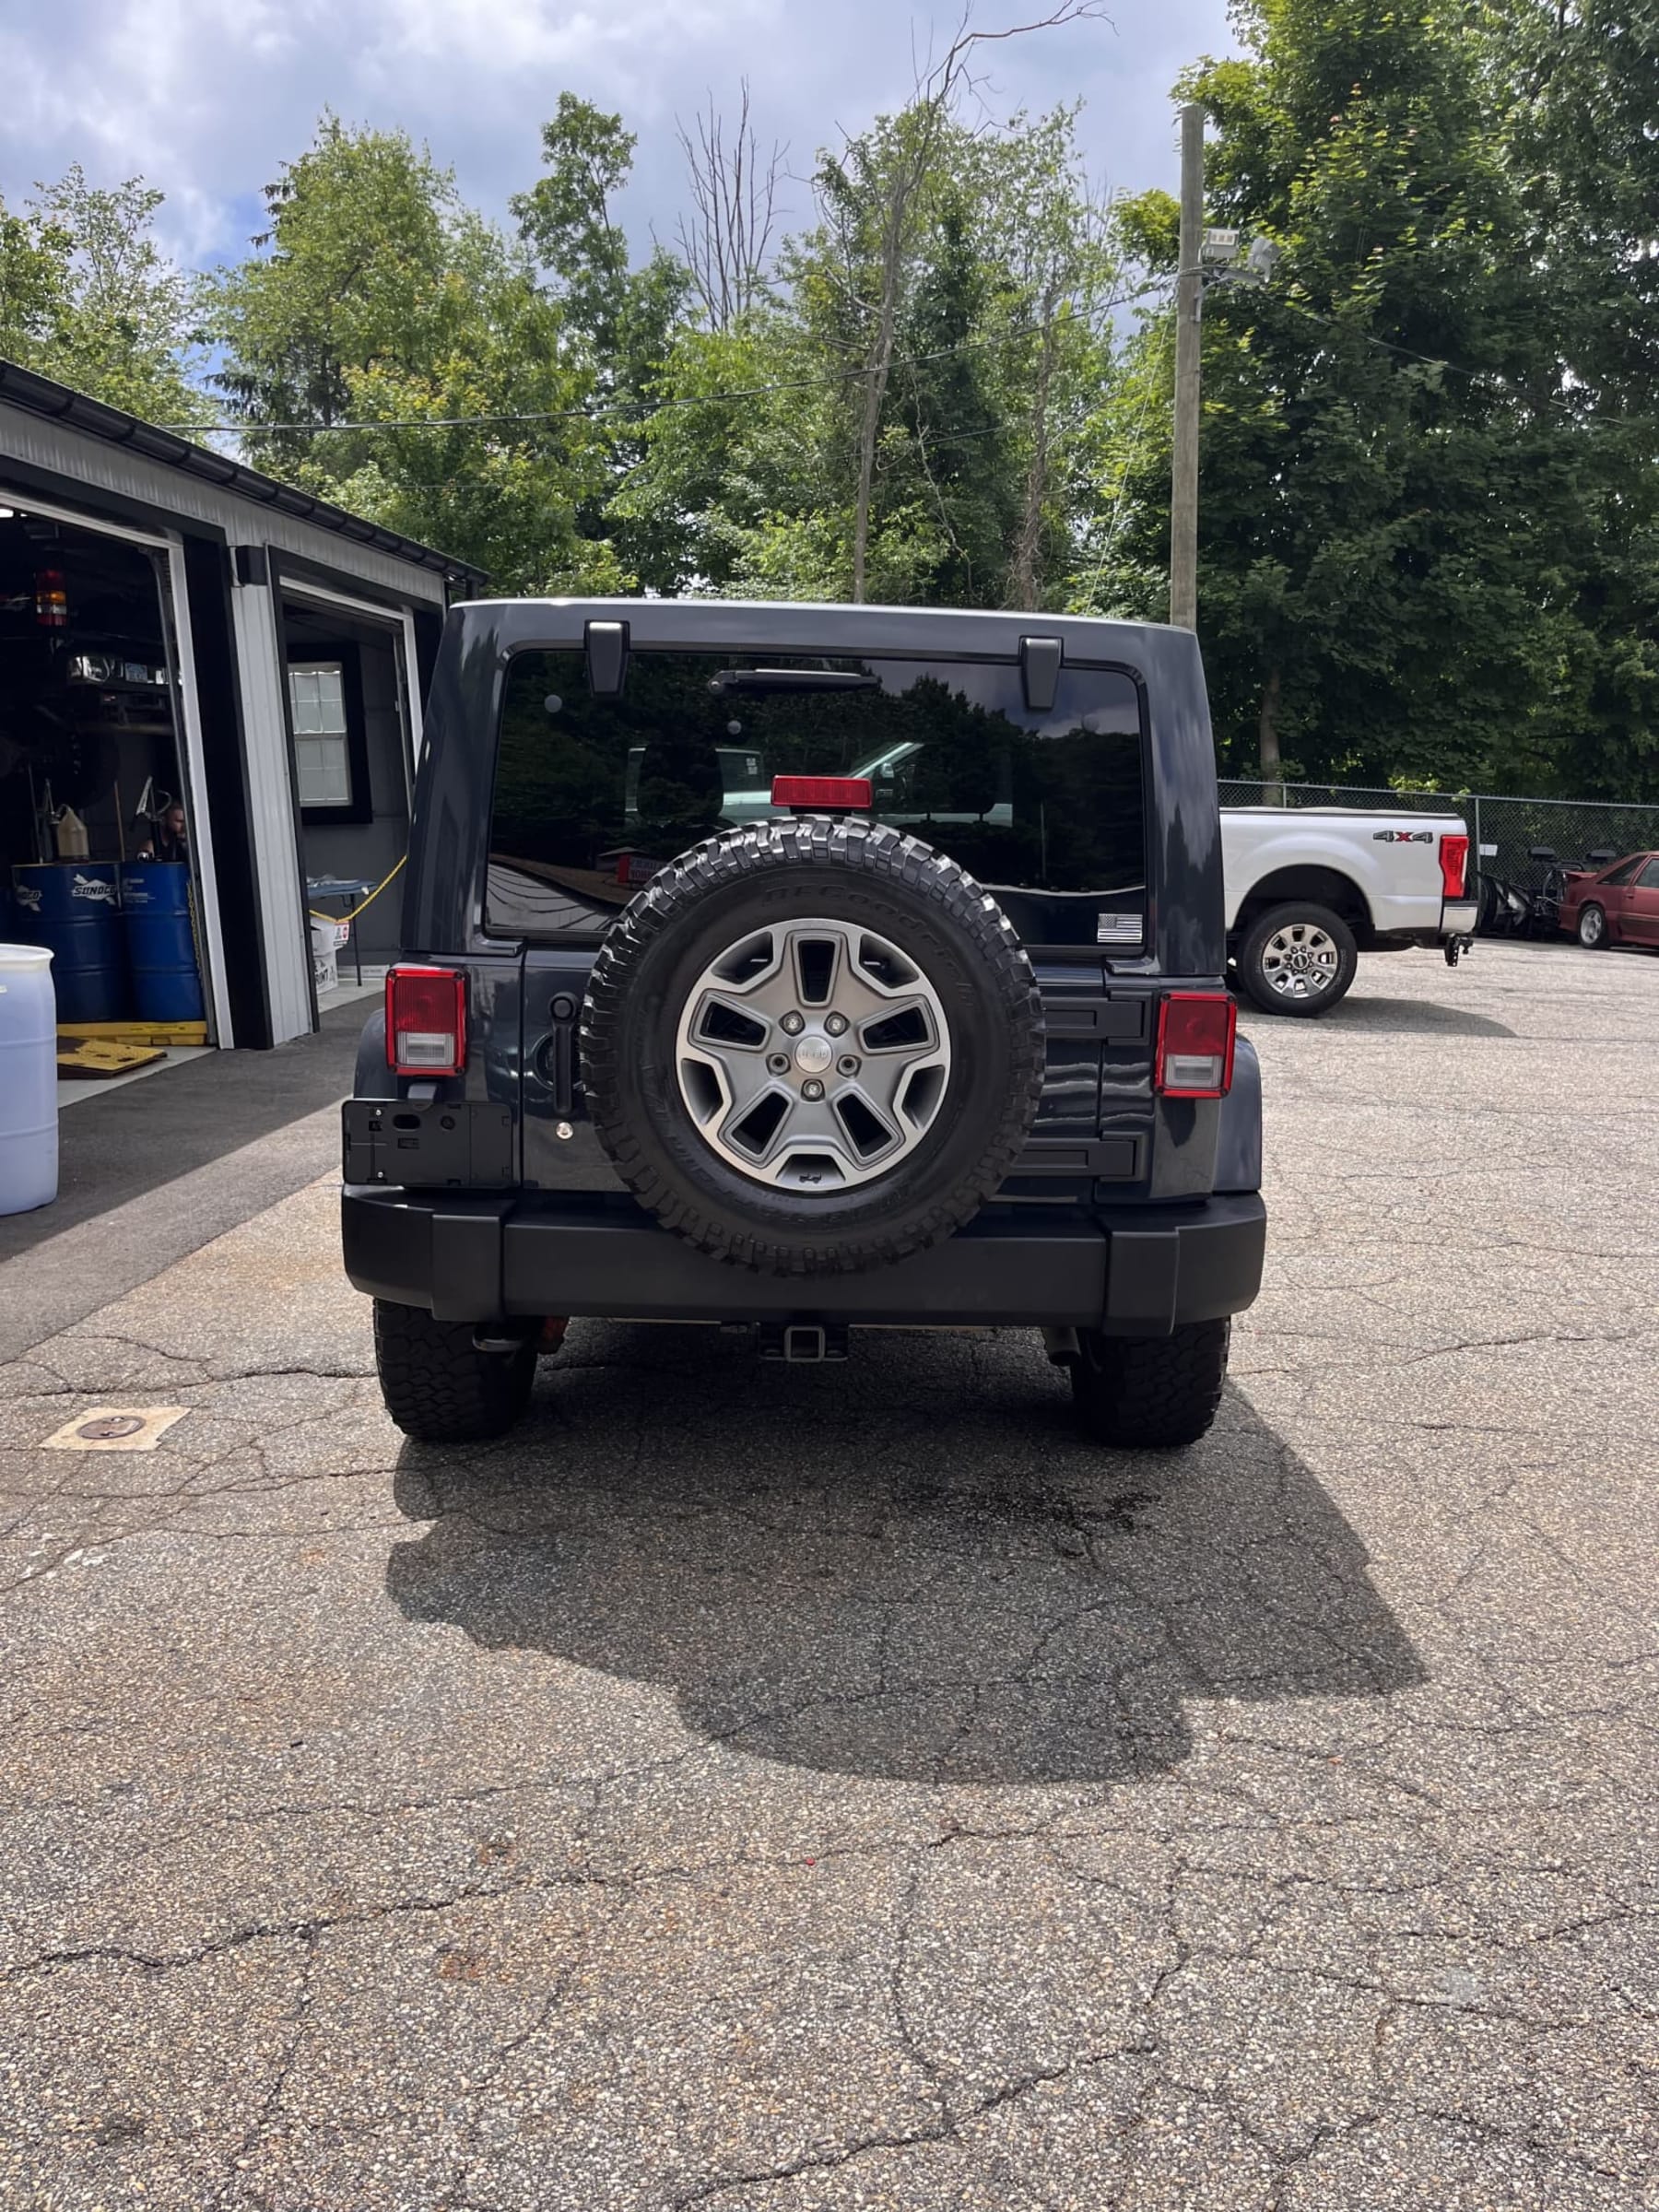 NEW ARRIVAL!! 2016 Jeep Unlimited Rubicon!! Clean Carfax!! ONLY 29,500 miles!! Loaded with body colored matching hardtop, leather heated seats, soft top, Navigation, Bluetooth and much more!! With ONLY 29,500 miles definitely won’t last at $28,900!!